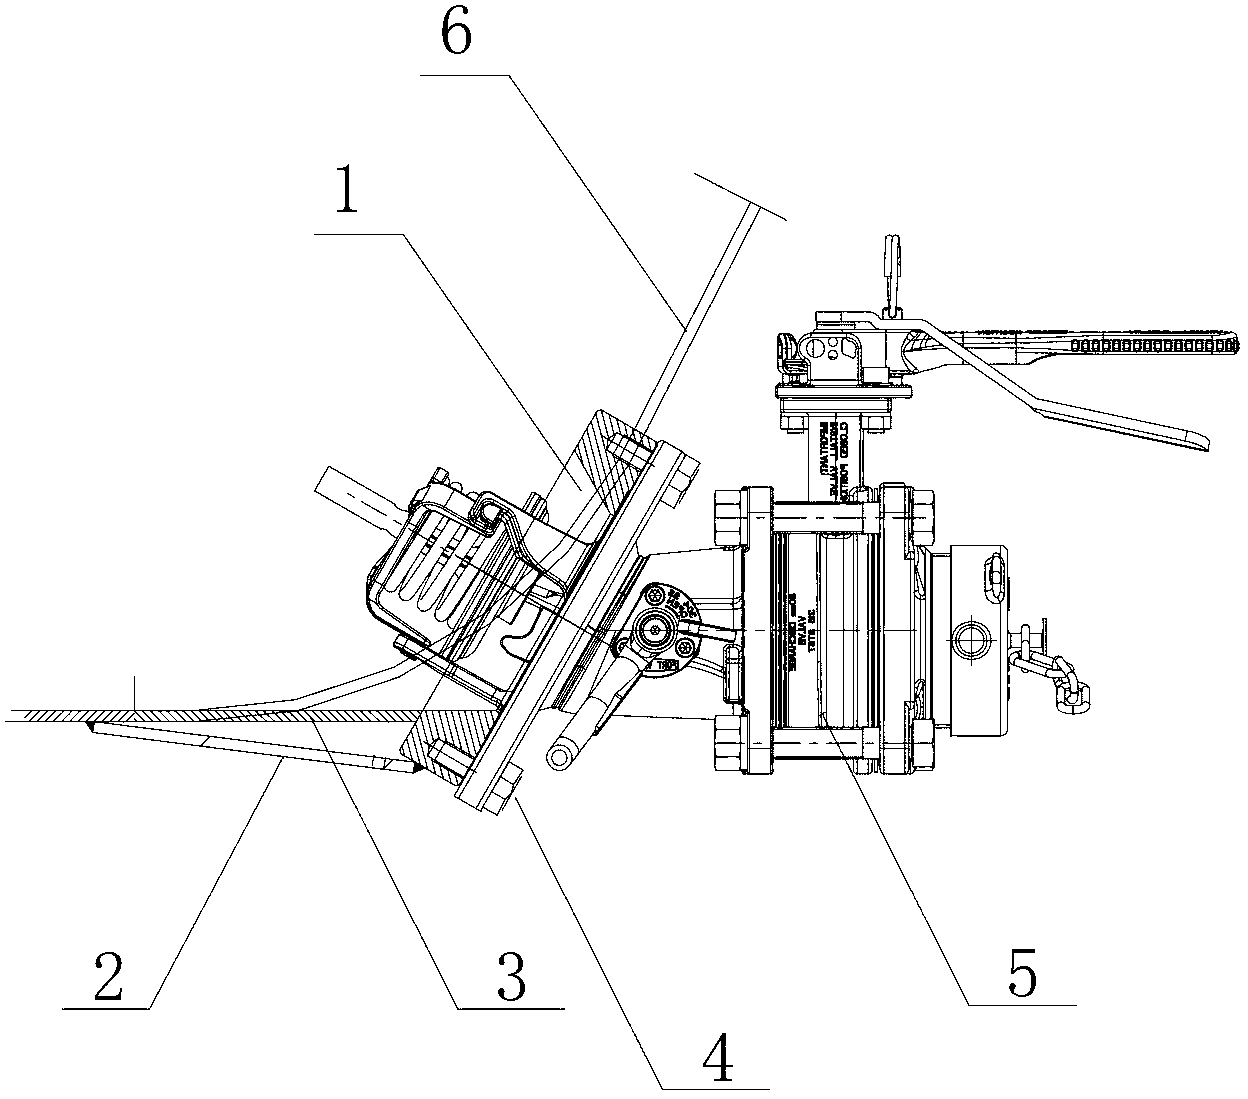 Bottom discharge system and tank container